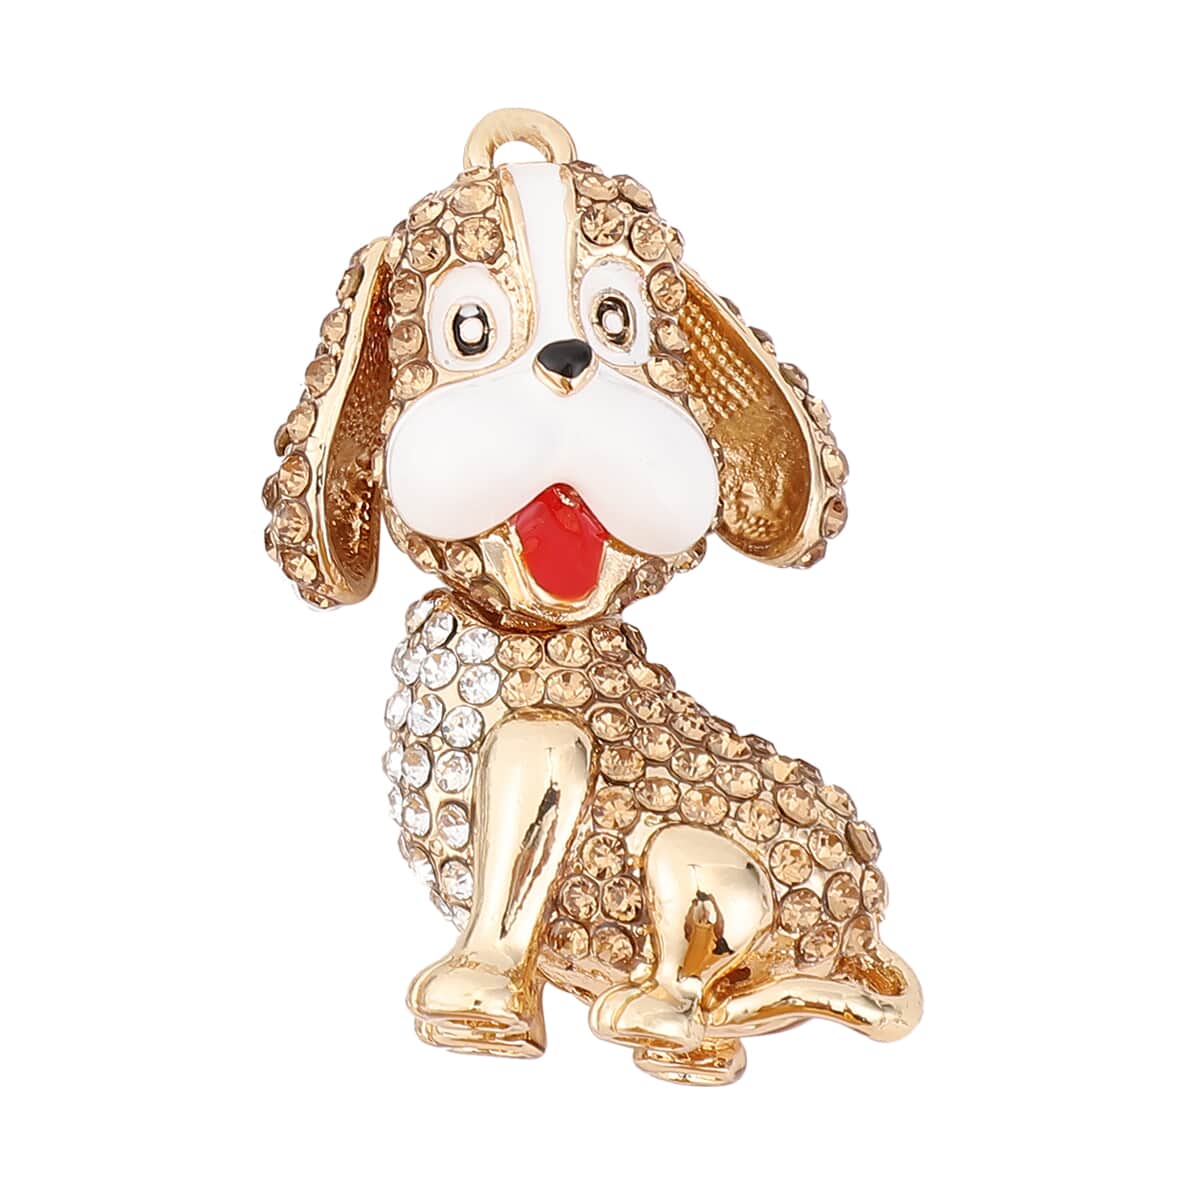 Champagne and White Austrian Crystal and Enameled Dog Keychain and Mirror in Goldtone, Crystal Keychain and Compact Mirror for Purse, Handbag Keychain image number 6